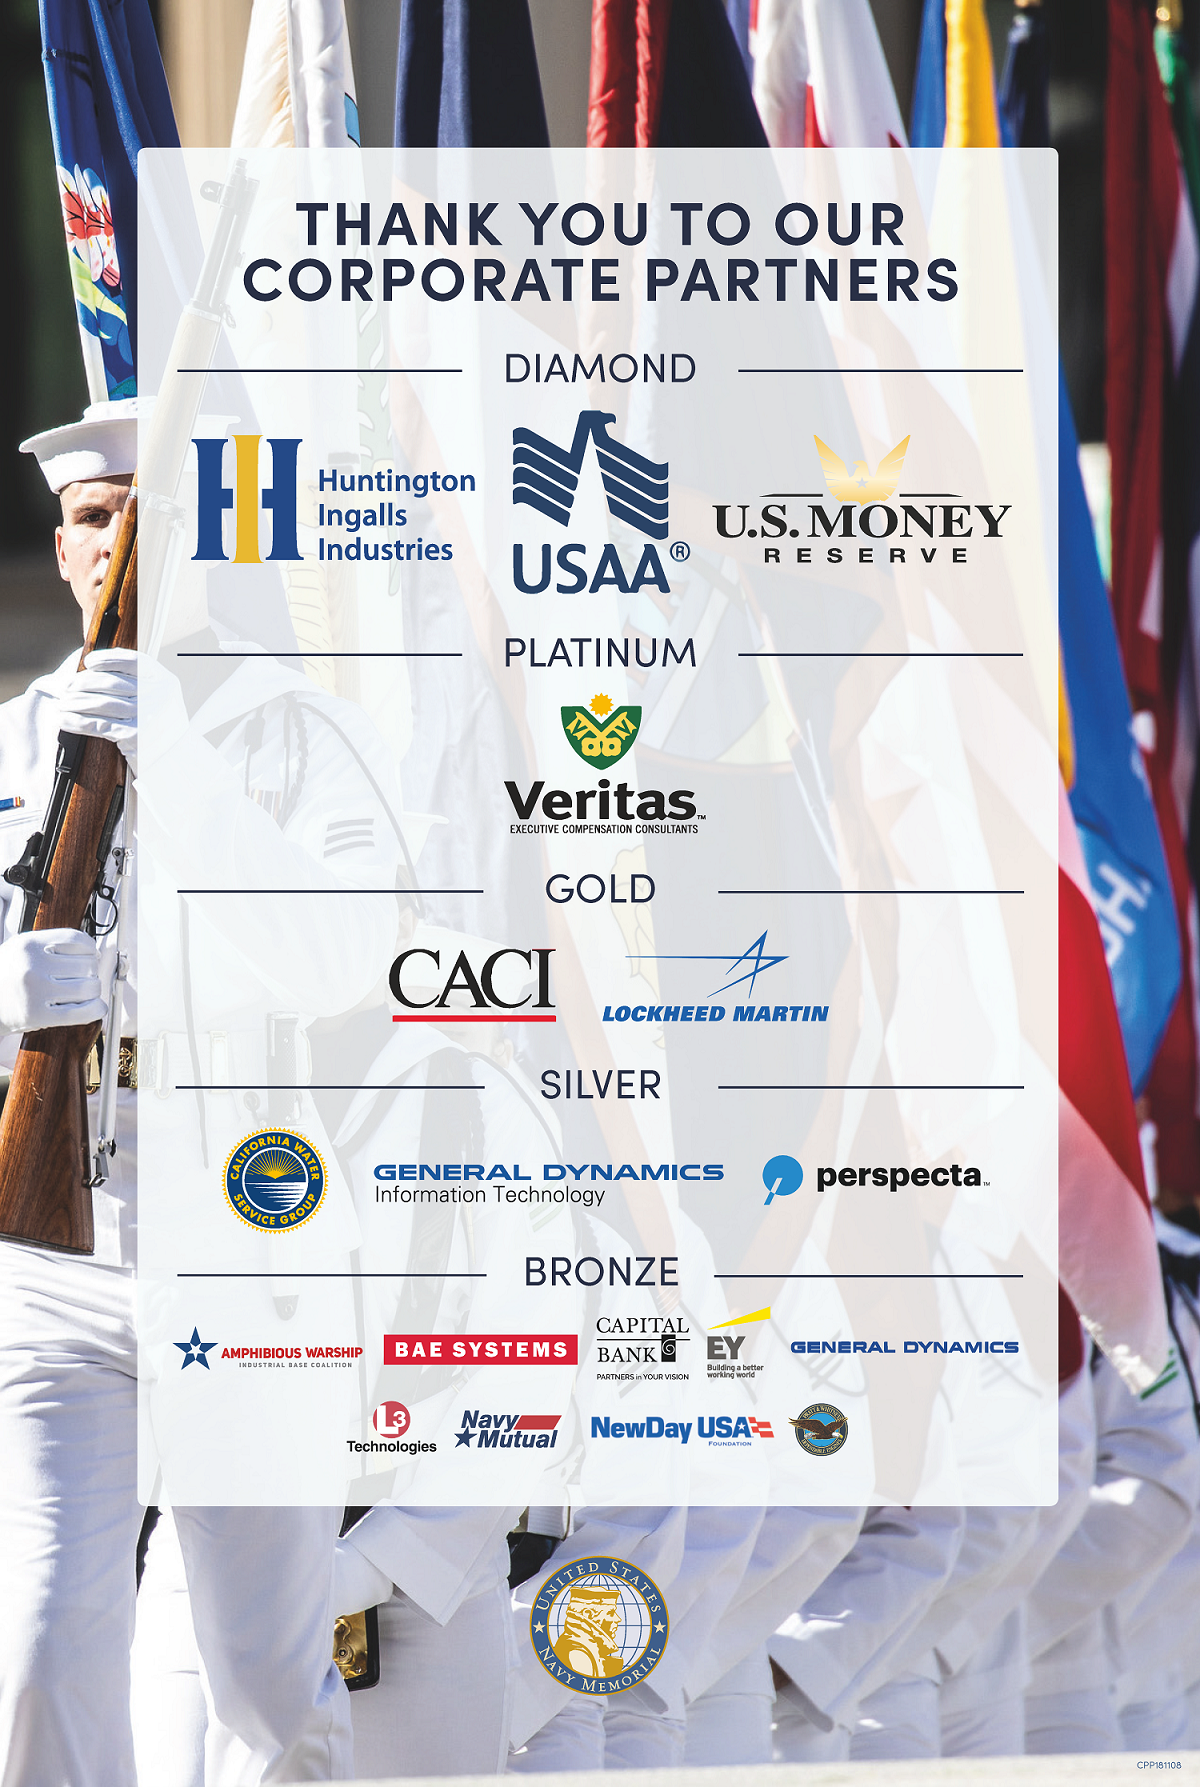 Corporate Partners of the United States Navy Memorial.